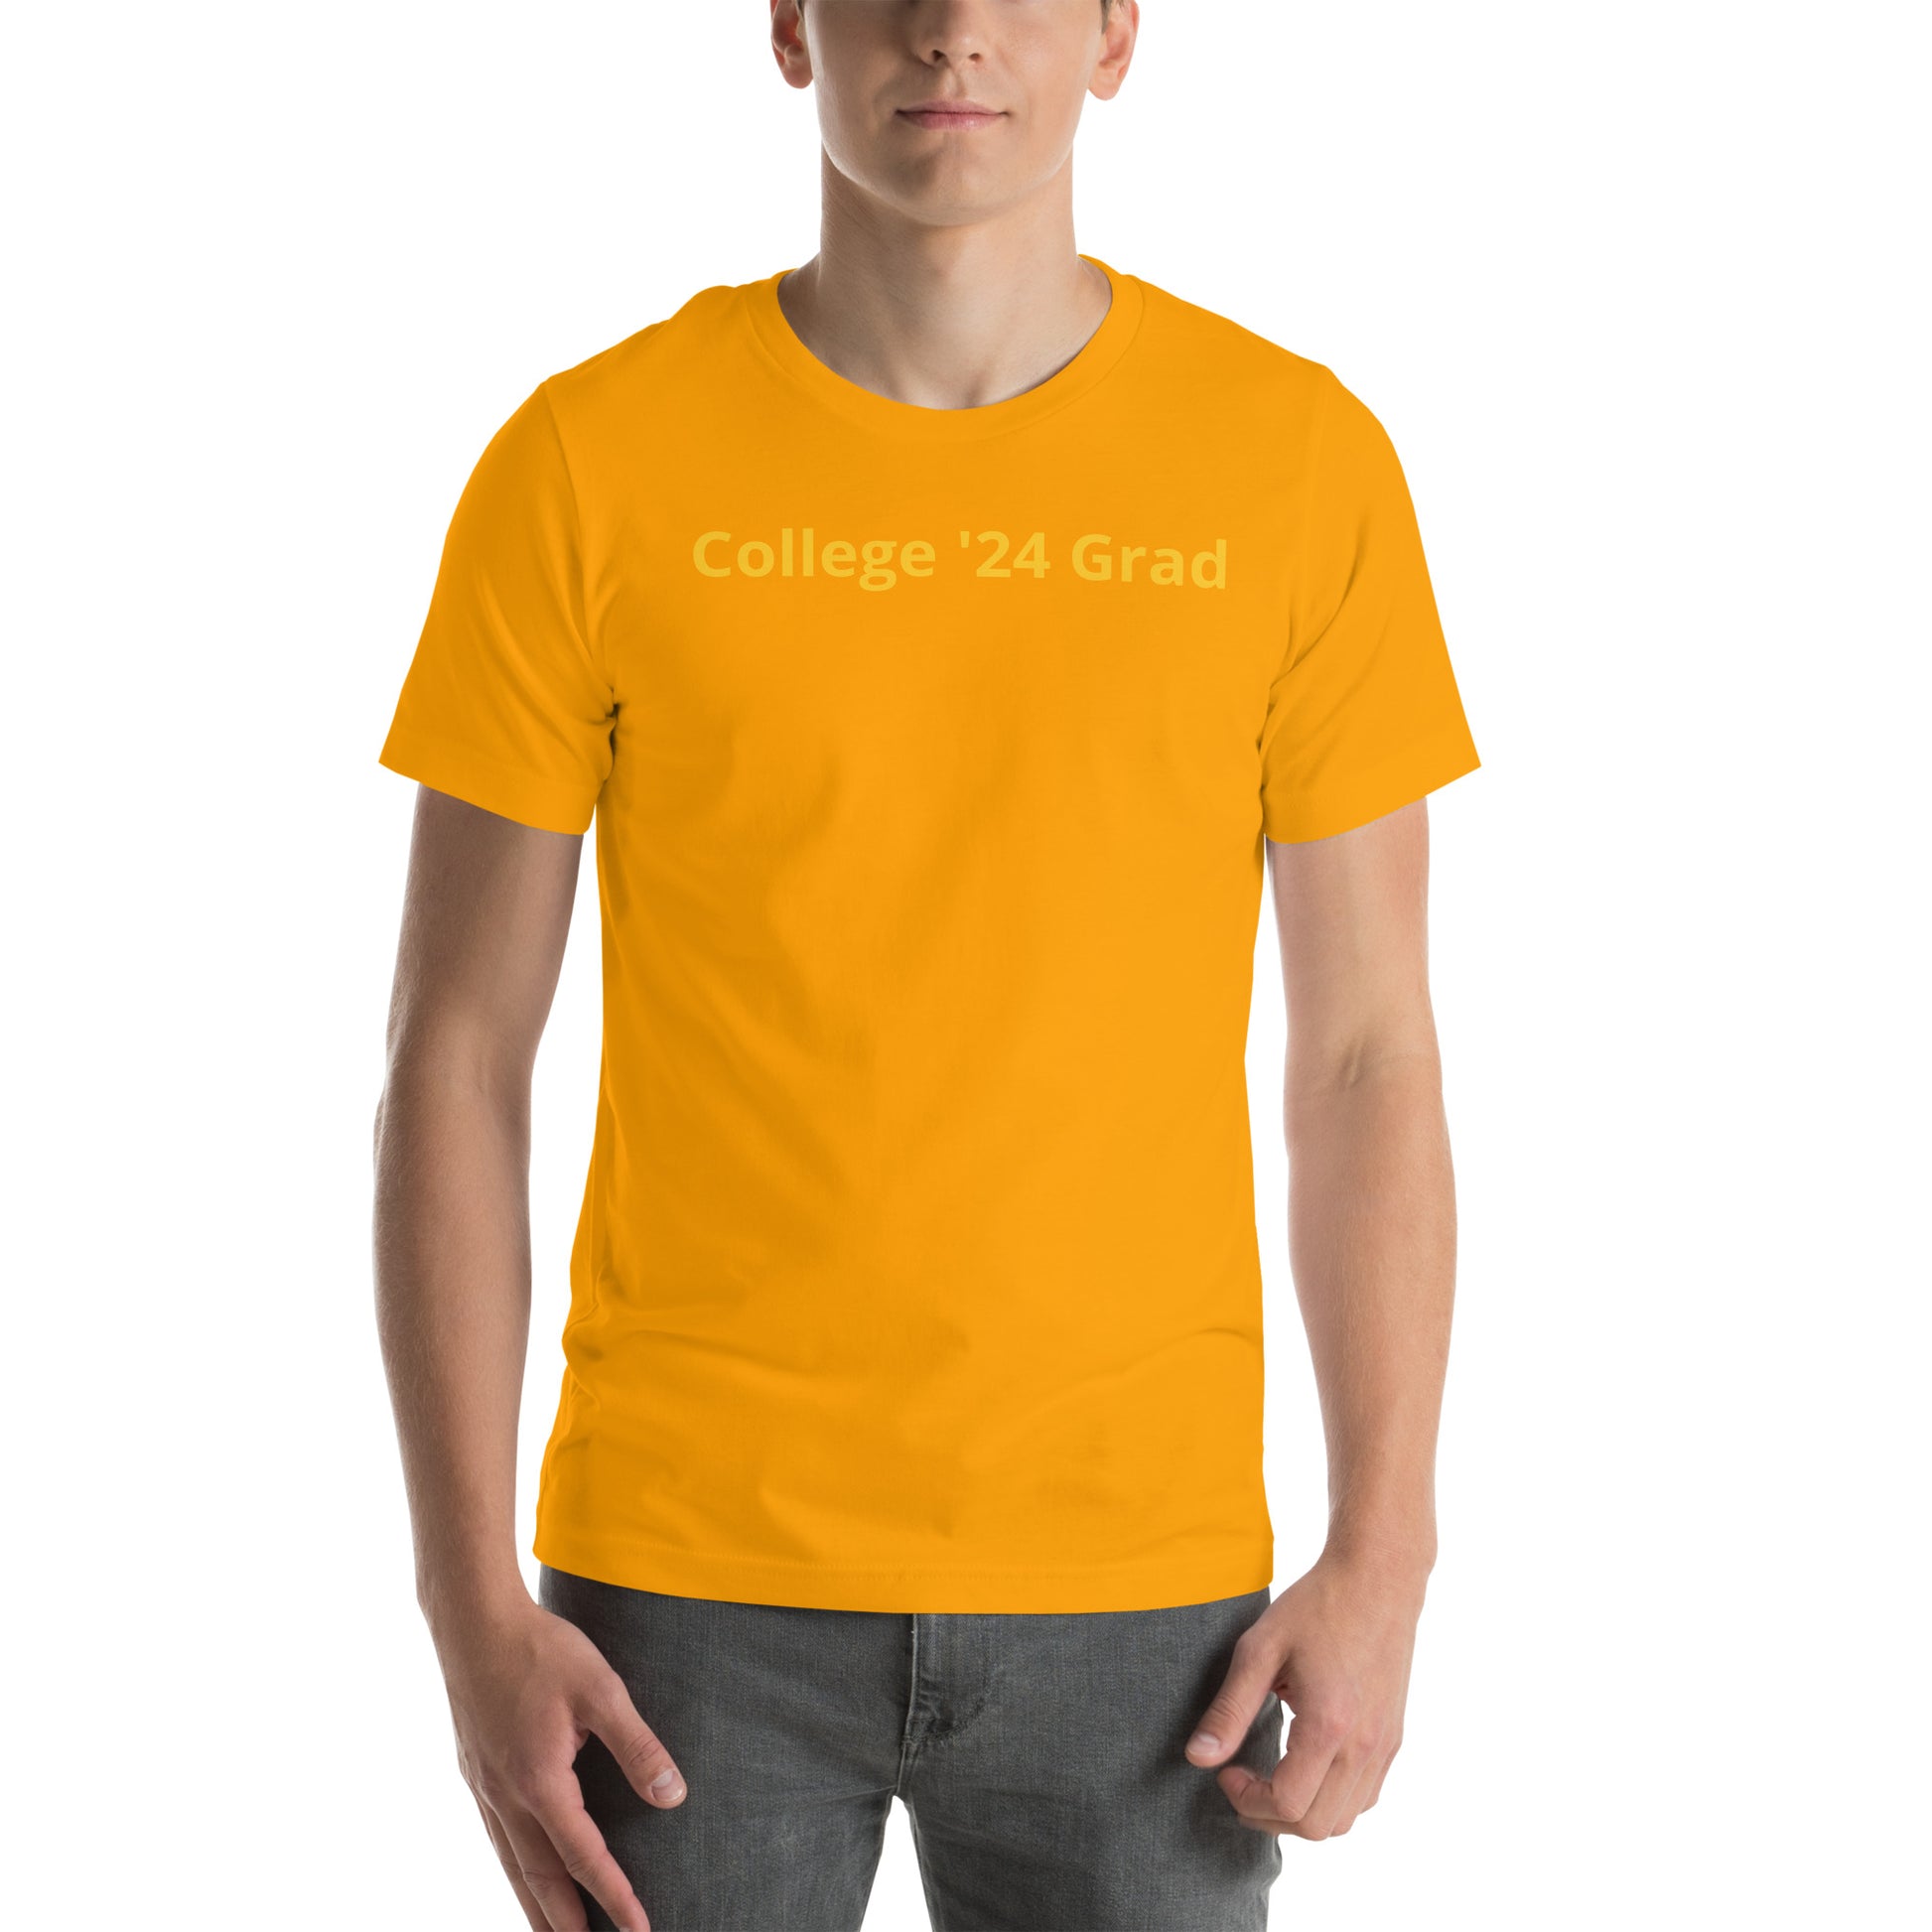 Gold color short sleeve tee shirt that says "College '24 Grad" on the front and "Thank you, Mom & Dad" on the back in subtle yellow-gold font